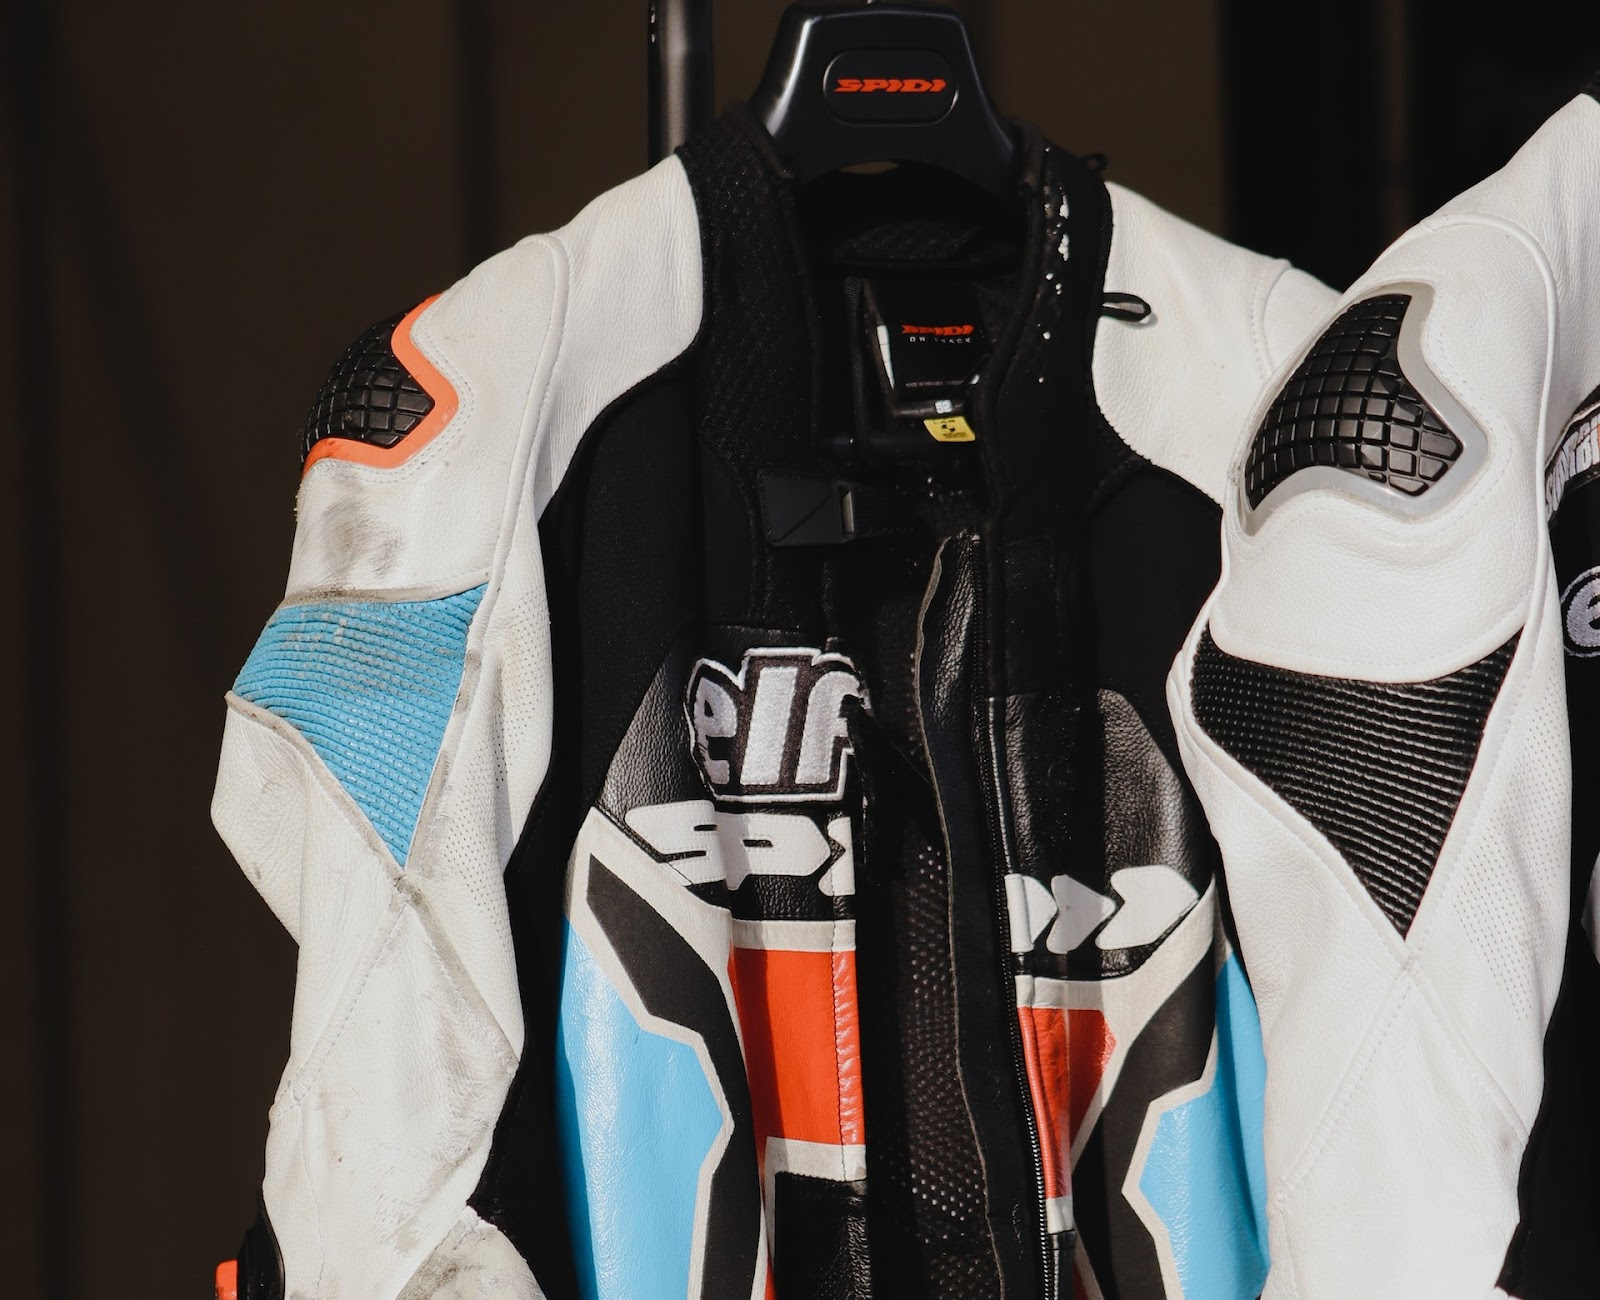 A protective motorbike suit hanging on a clothes hanger